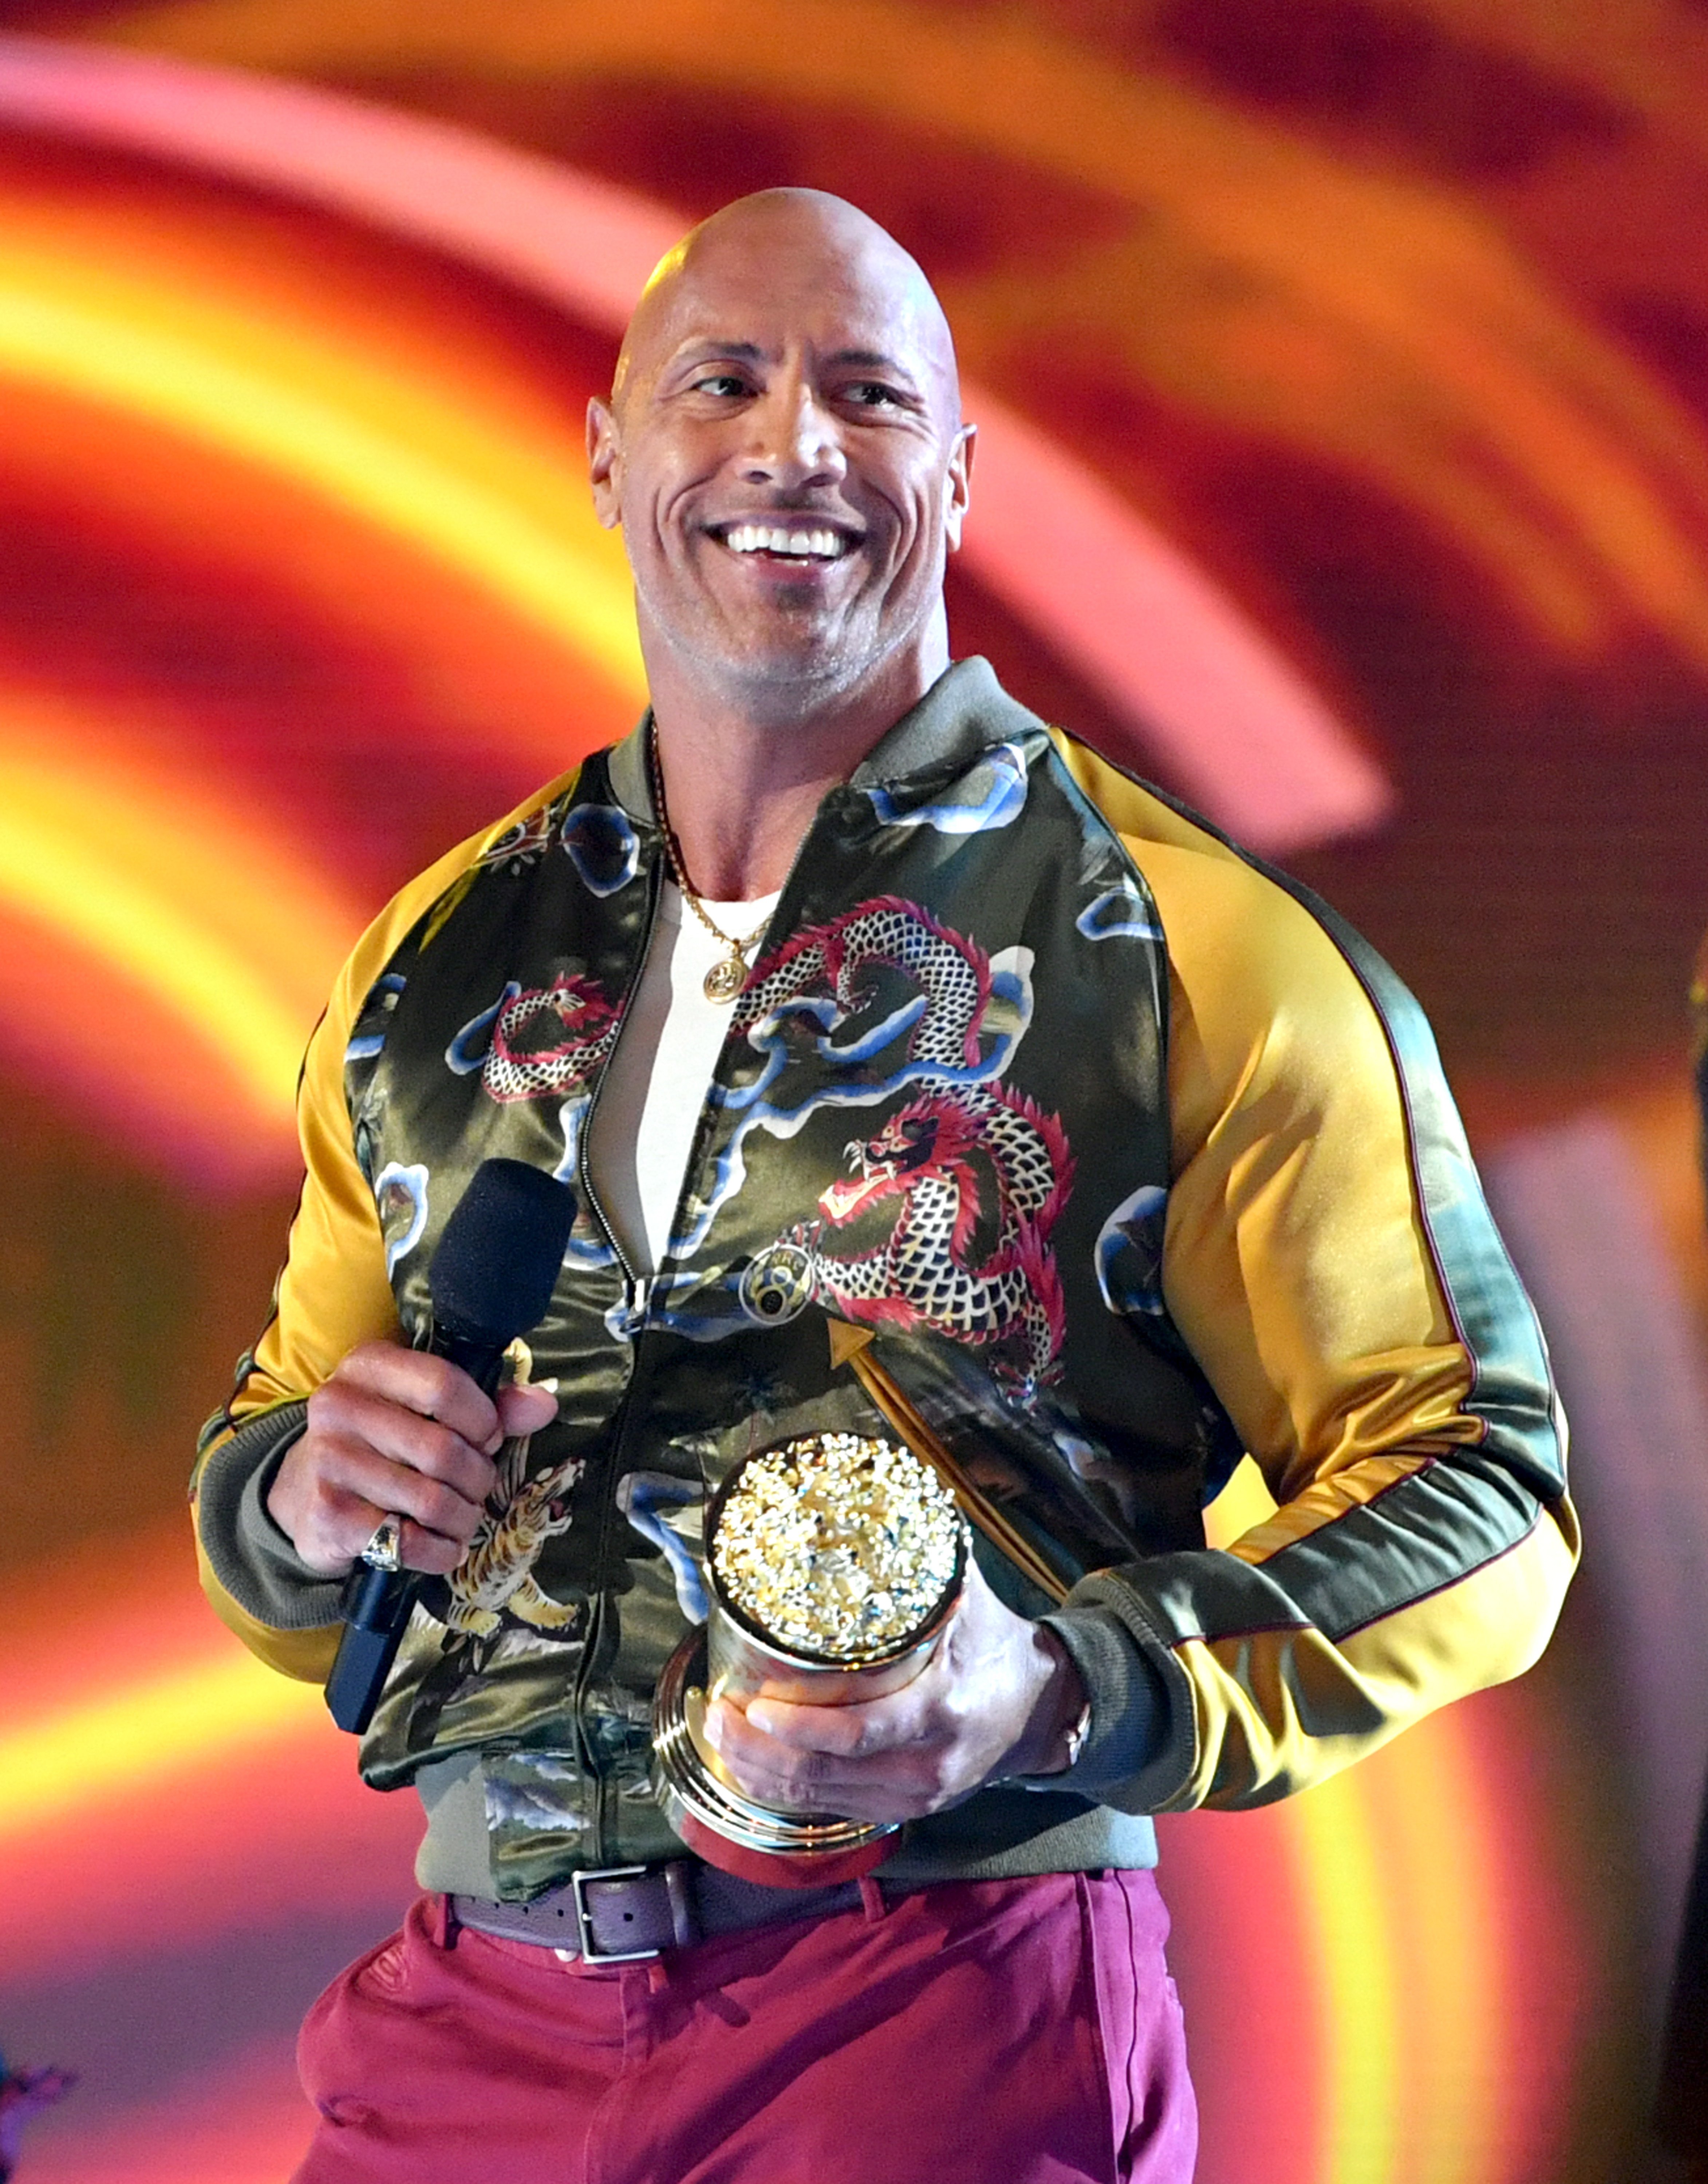 Dwayne Johnson attends the MTV Movie and TV Awards in Santa Monica, California on June 15, 2019 | Photo: Getty Images